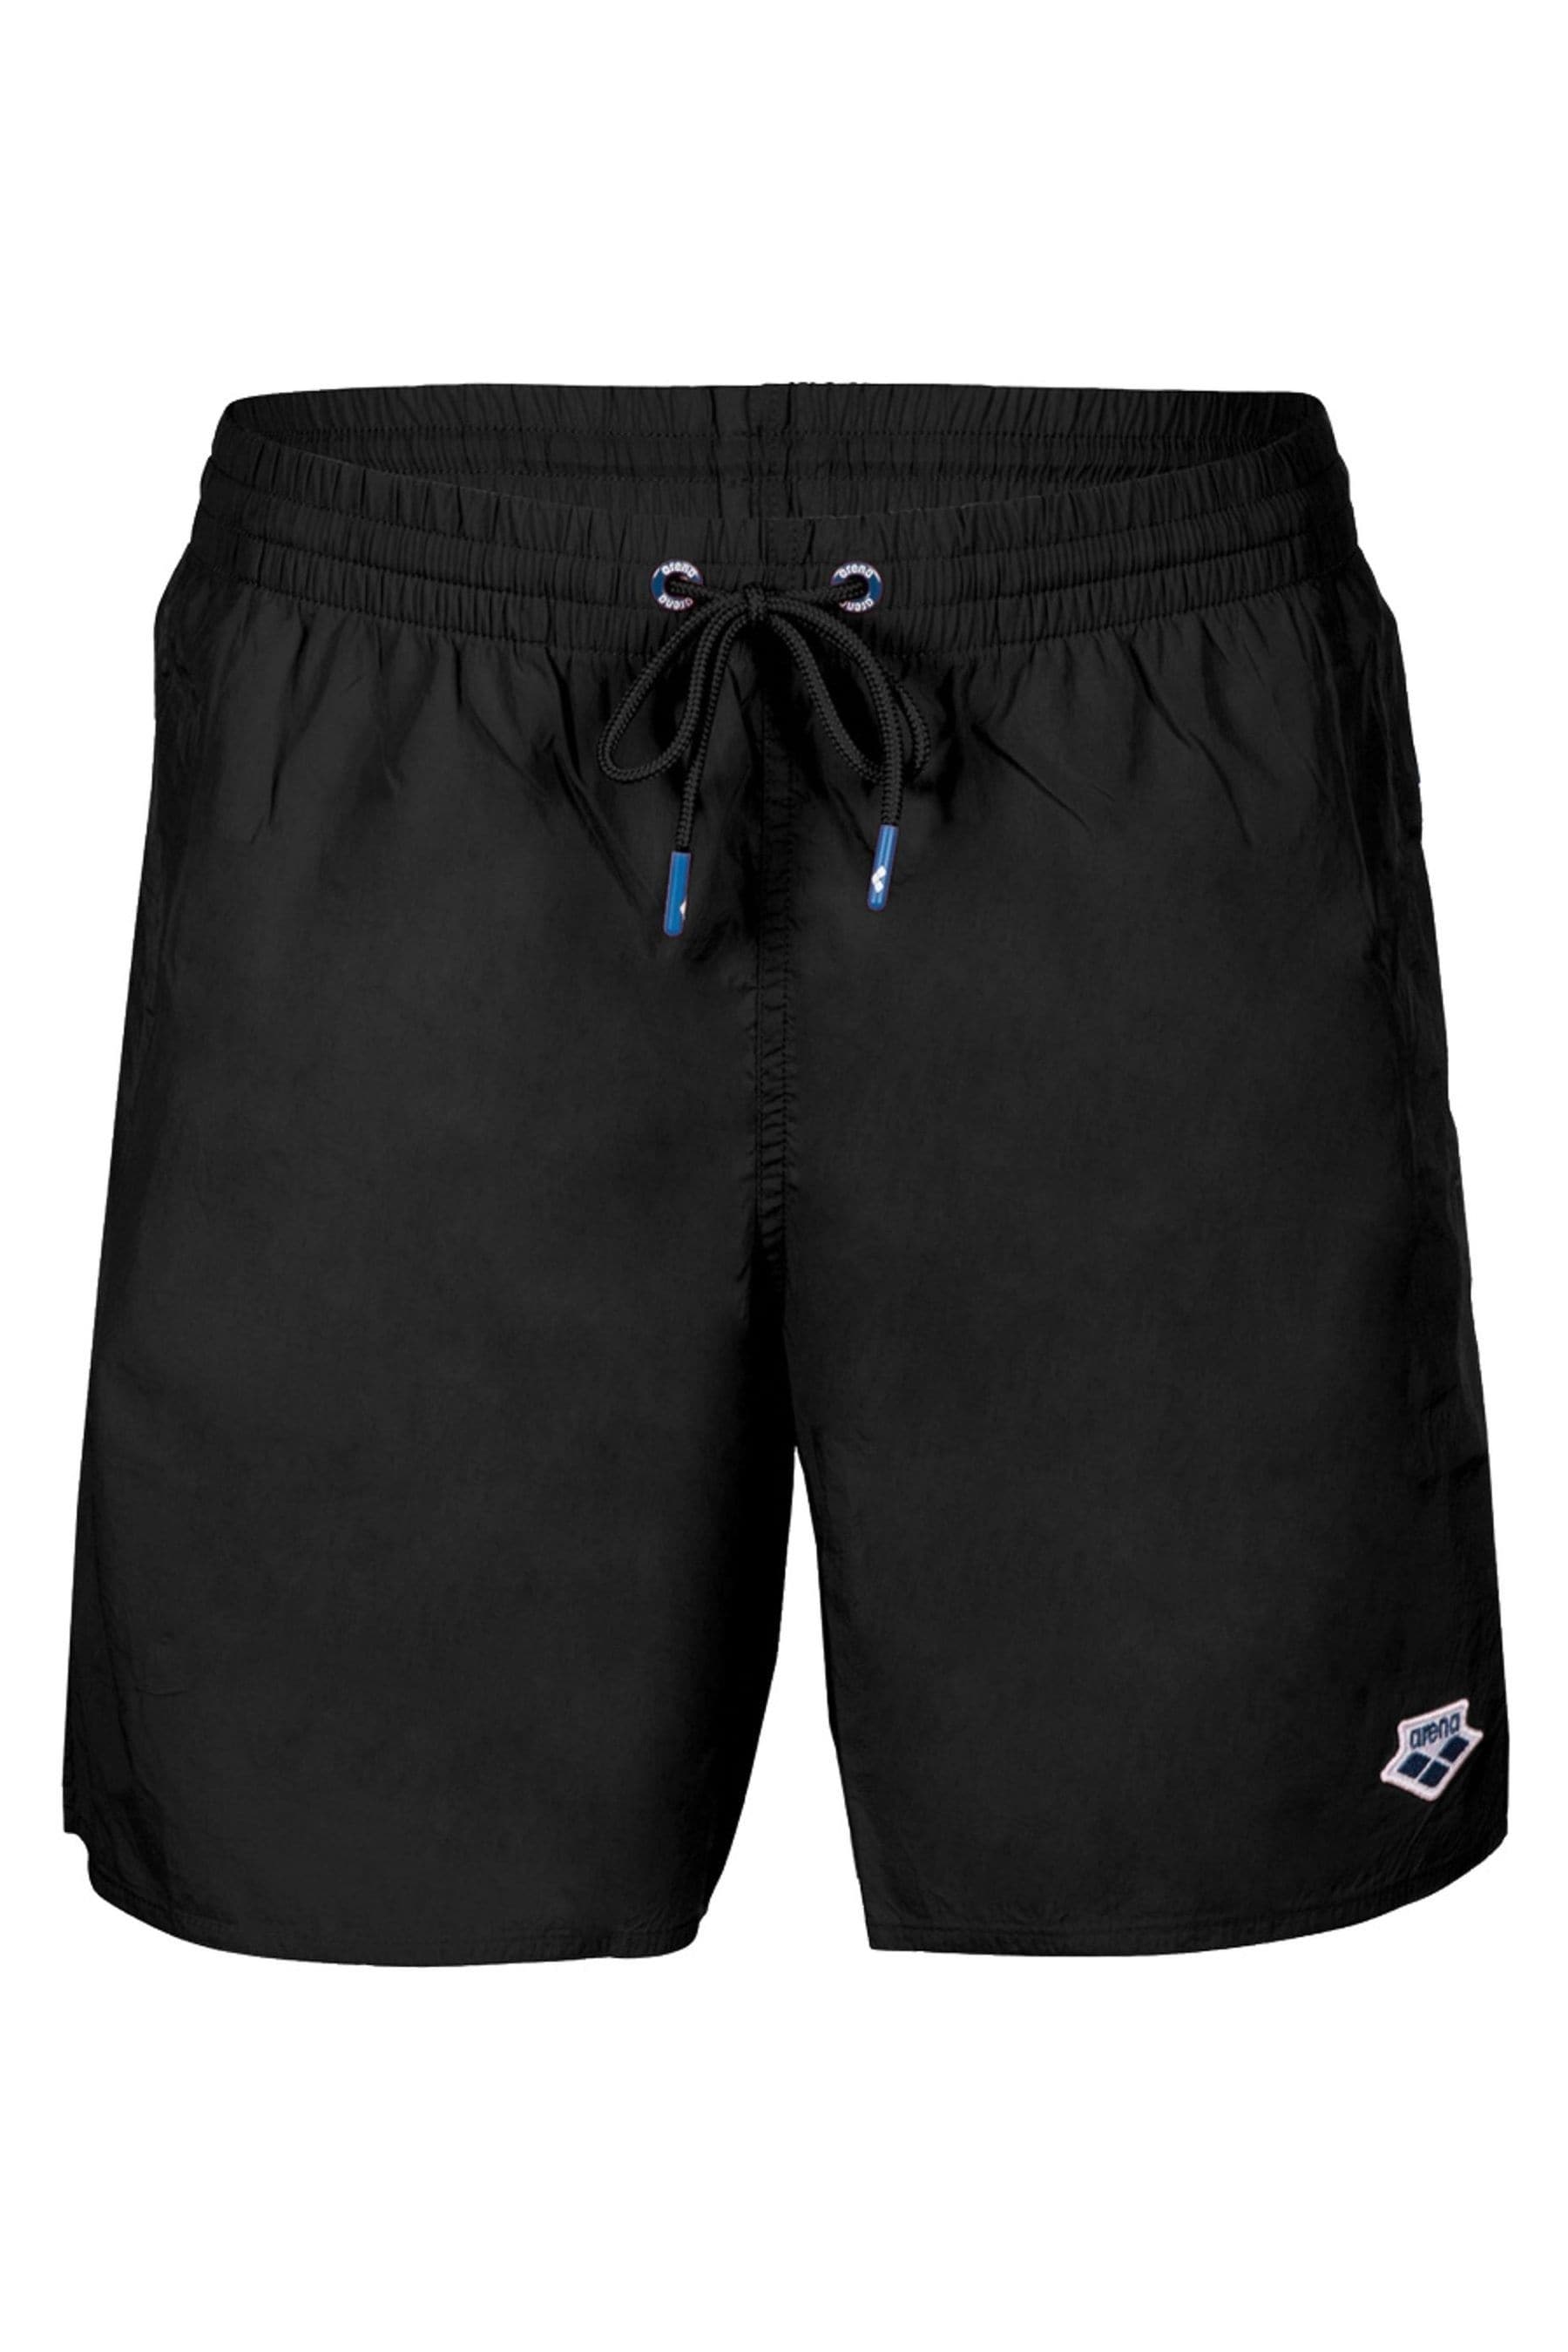 Buy Arena Icons Mens Solid Beach Black Boxers from the Next UK online shop